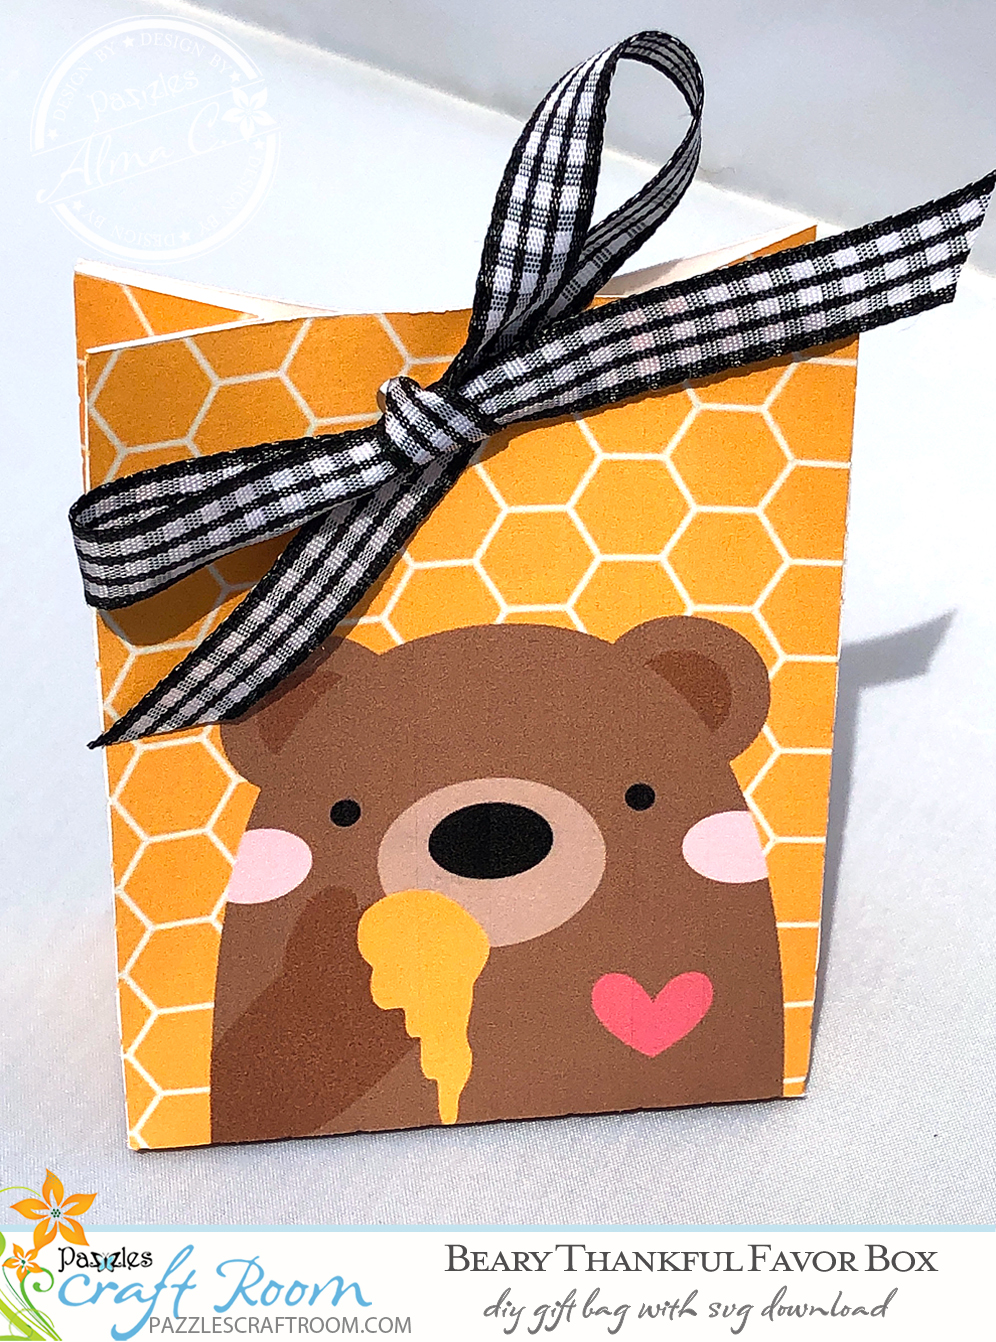 Pazzles DIY Beary Thankful Favor Box with instant SVG download. Compatible with all major electronic cutters including Pazzles Inspiration, Cricut, and Silhouette Cameo. Design by Alma Cervantes.